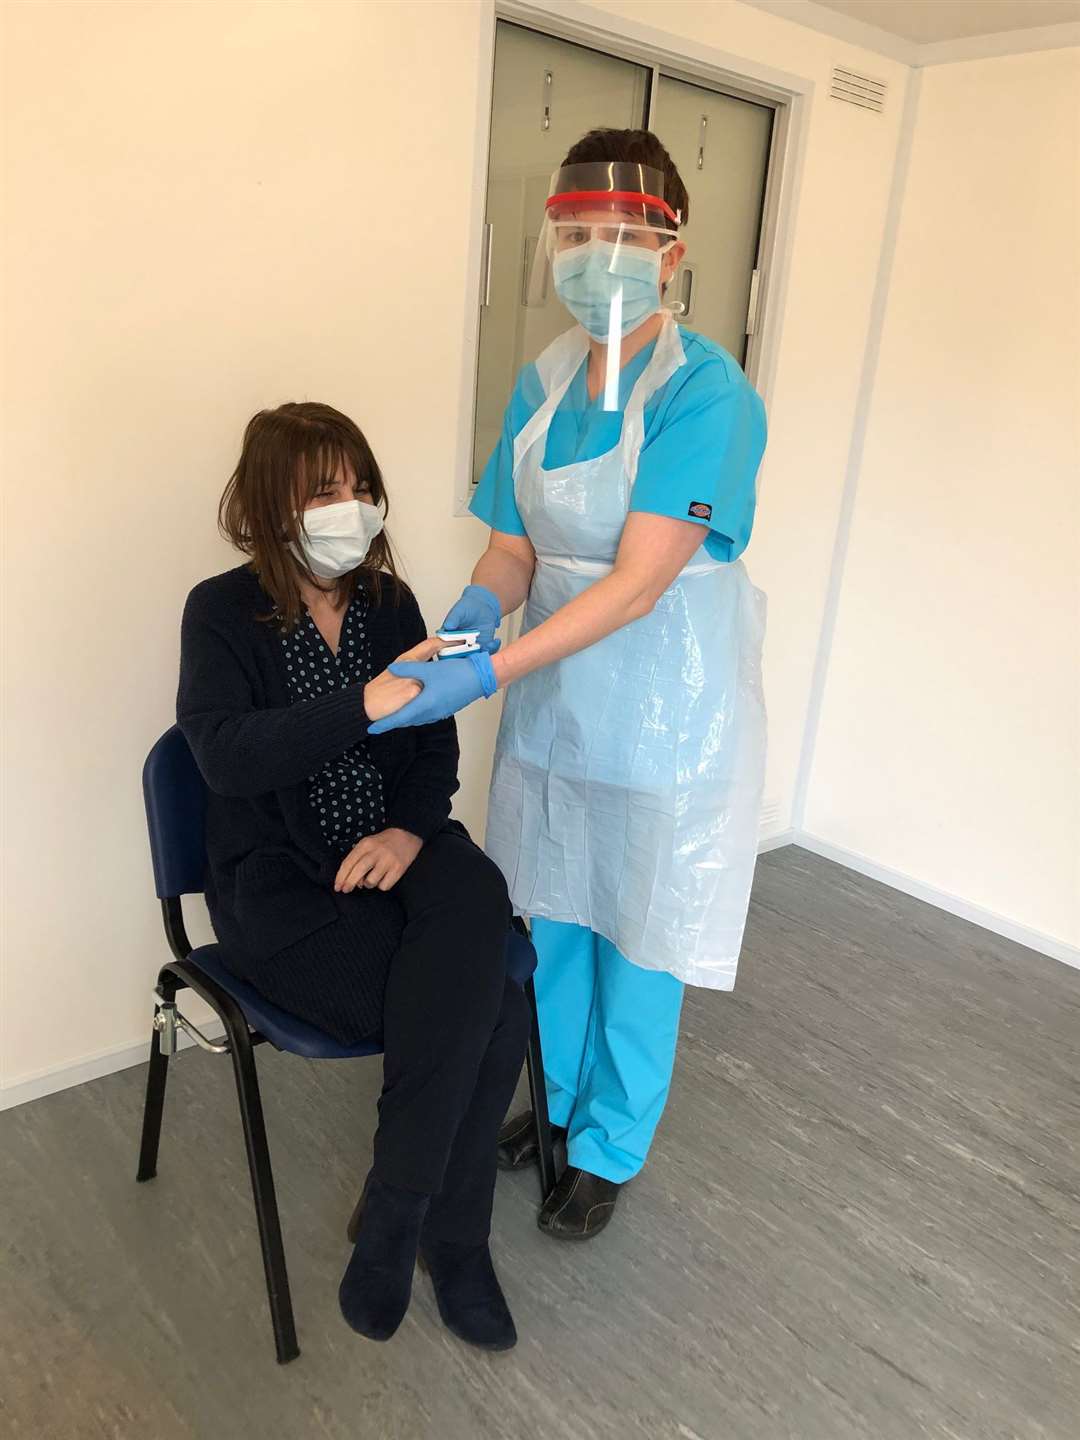 Staff at the Princes Street Surgery demonstrating use of the personal protective equipment.